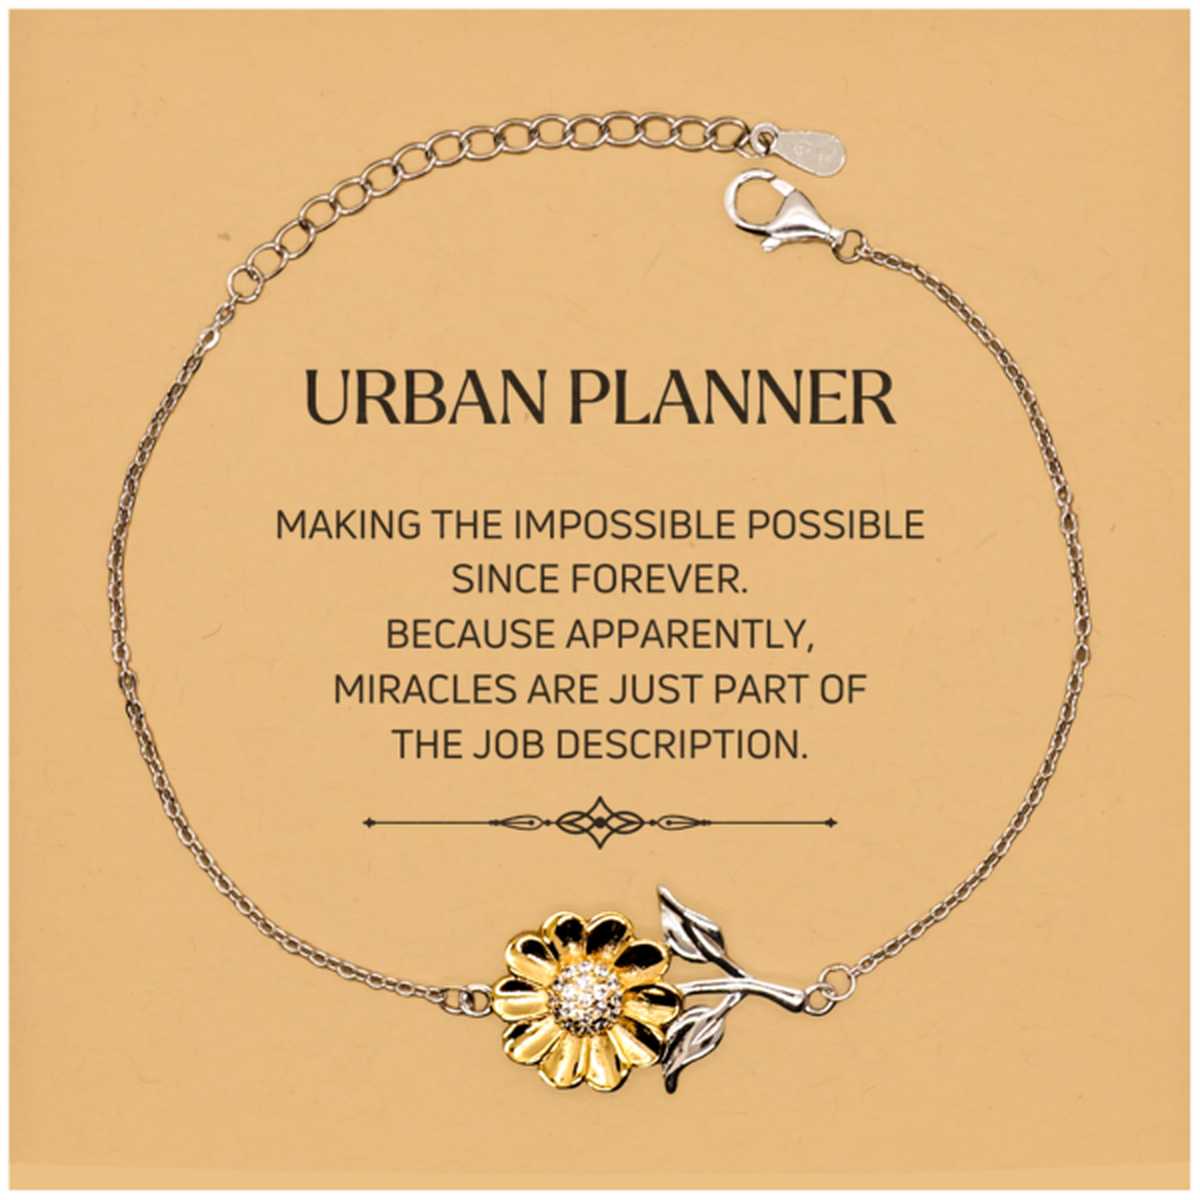 Funny Urban Planner Gifts, Miracles are just part of the job description, Inspirational Birthday Christmas Sunflower Bracelet For Urban Planner, Men, Women, Coworkers, Friends, Boss